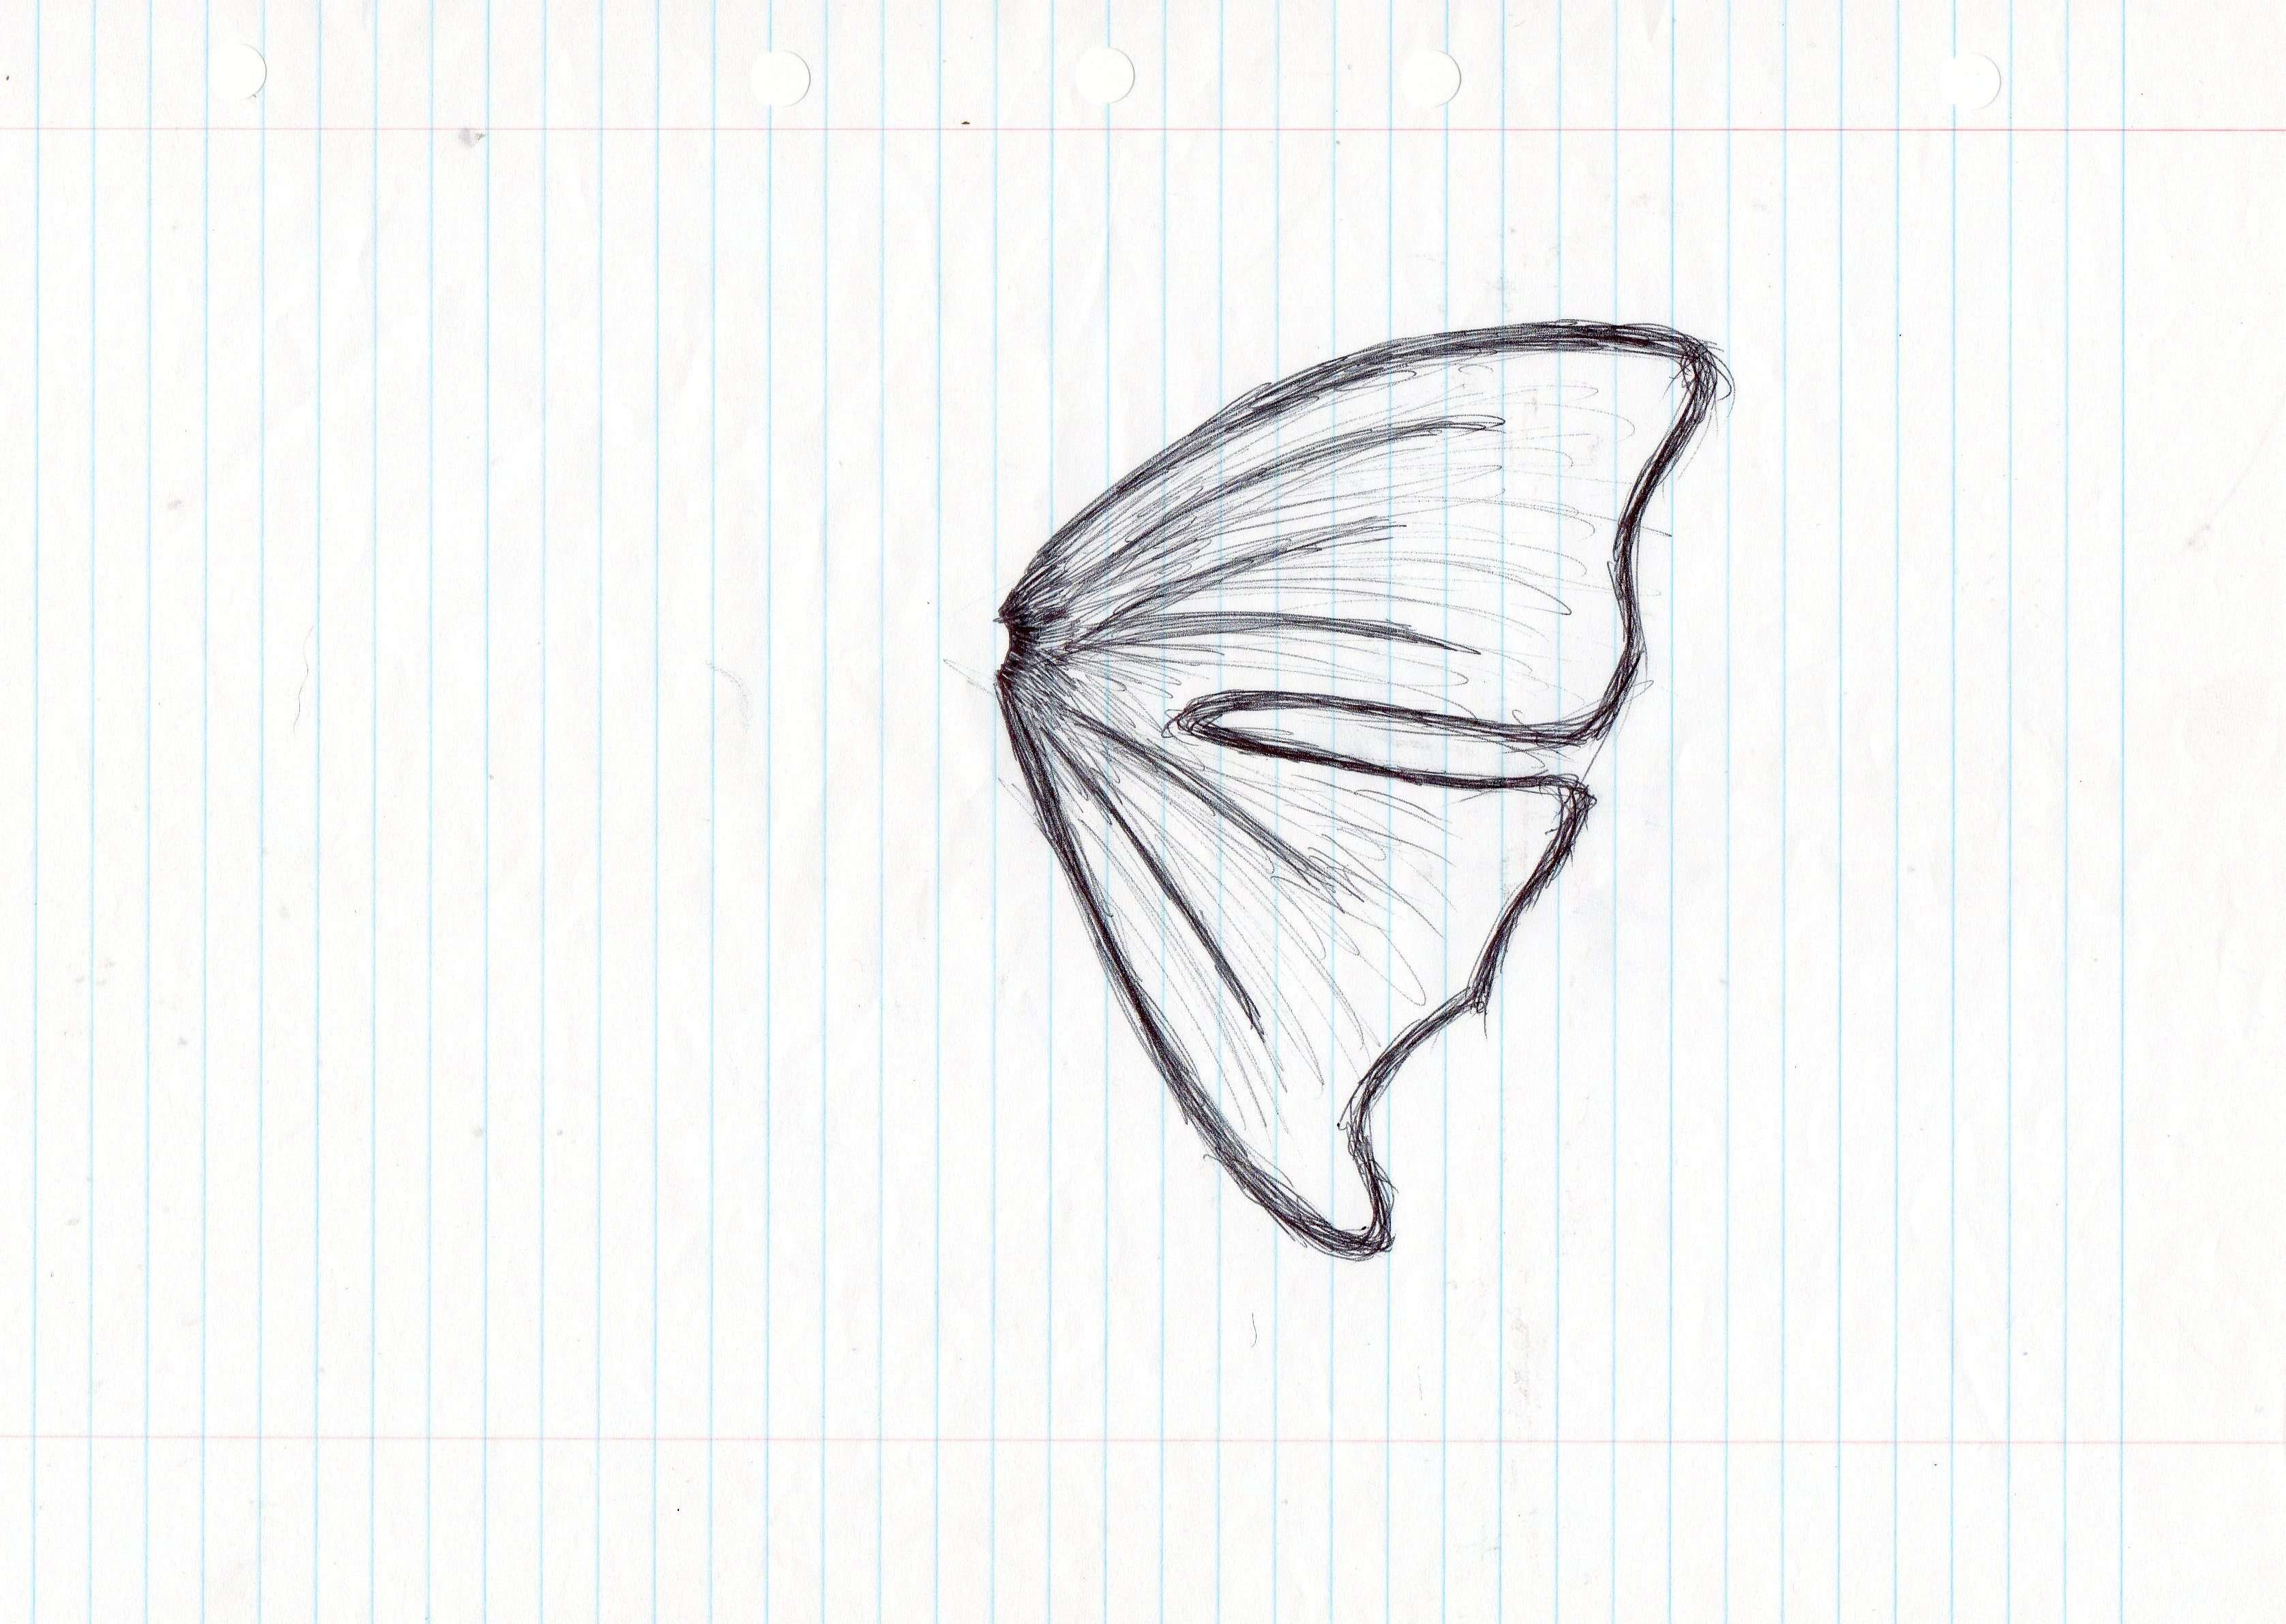 Butterfly wing Image Fifth drawing Closed angel wing set